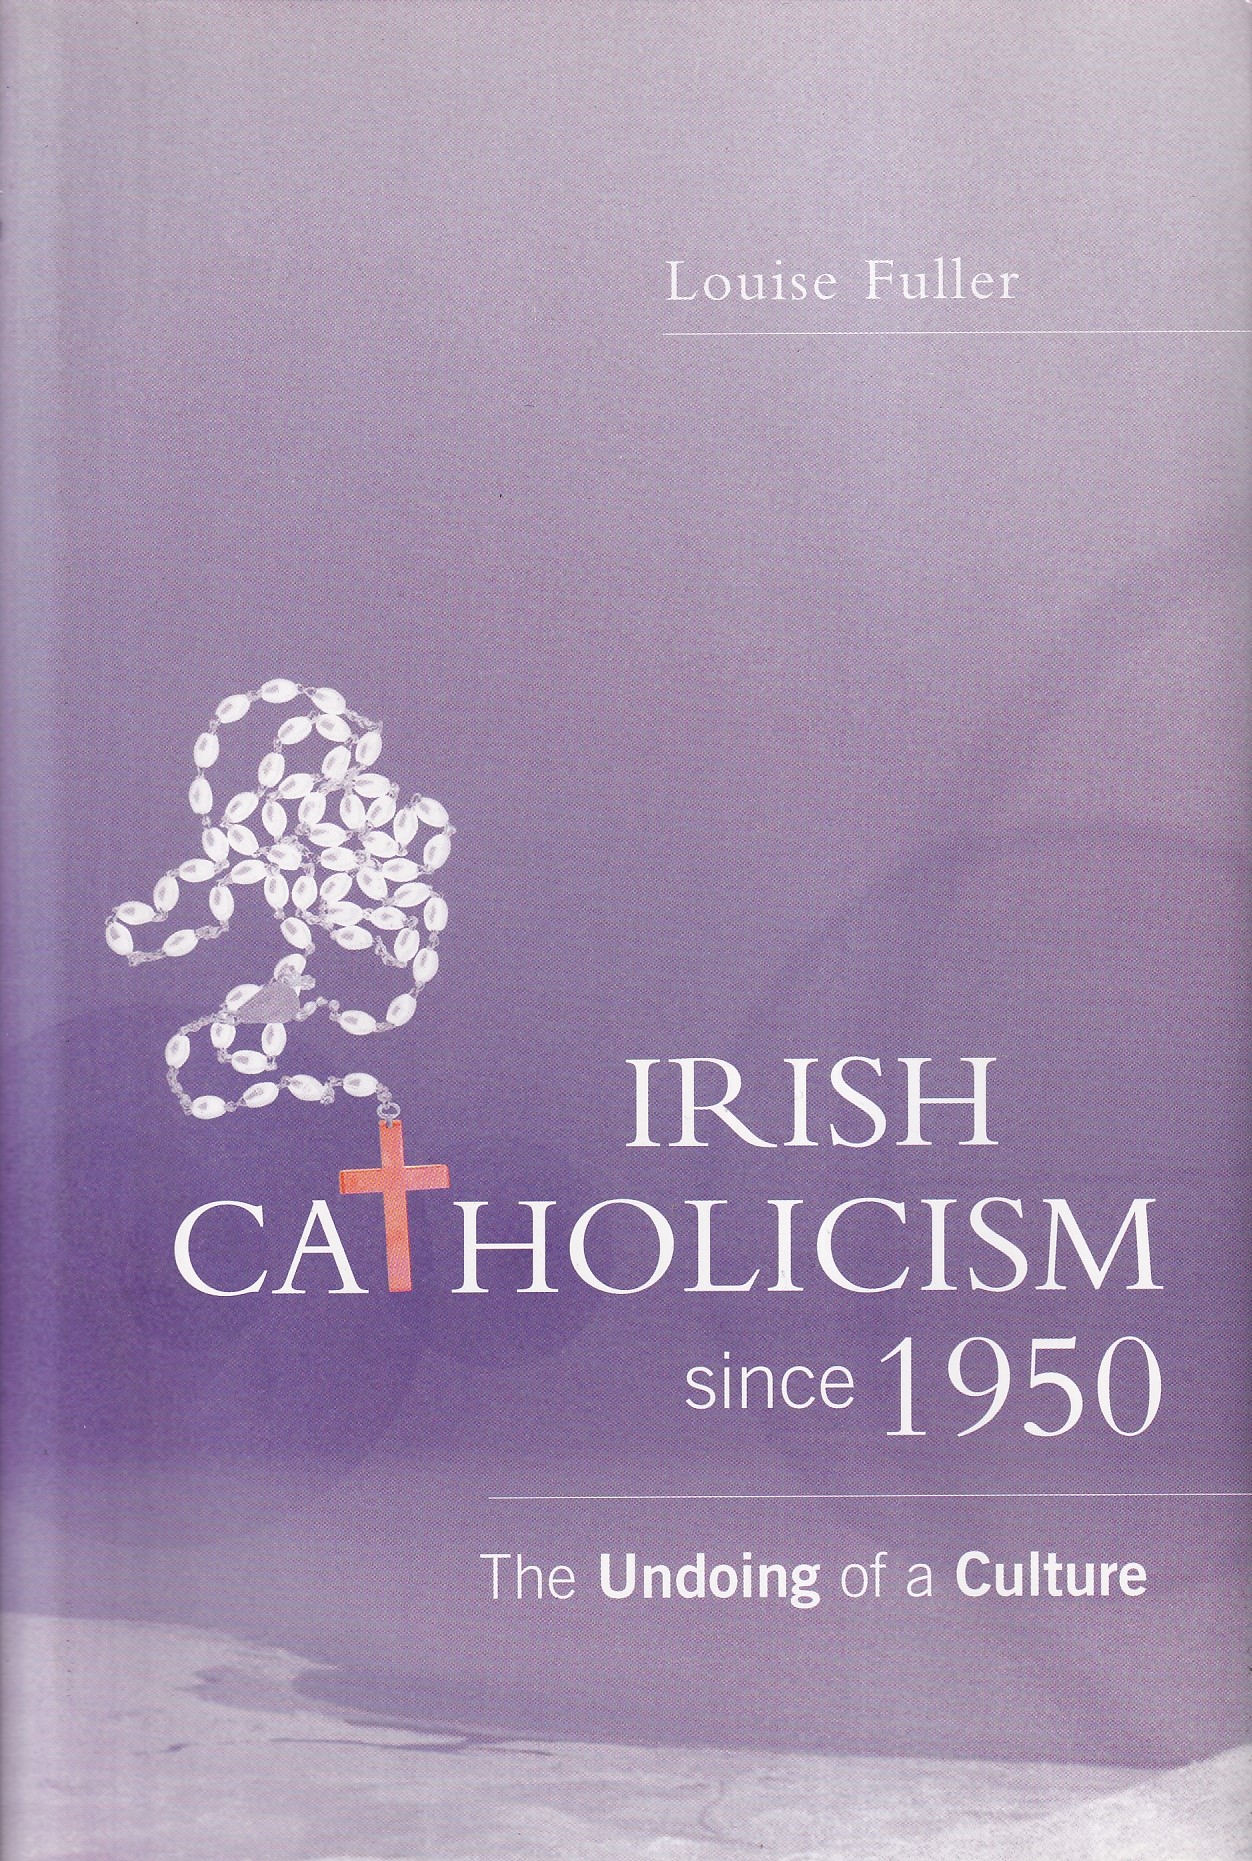 Irish Catholicism Since 1950: The Undoing of a Culture | Louise Fuller | Charlie Byrne's